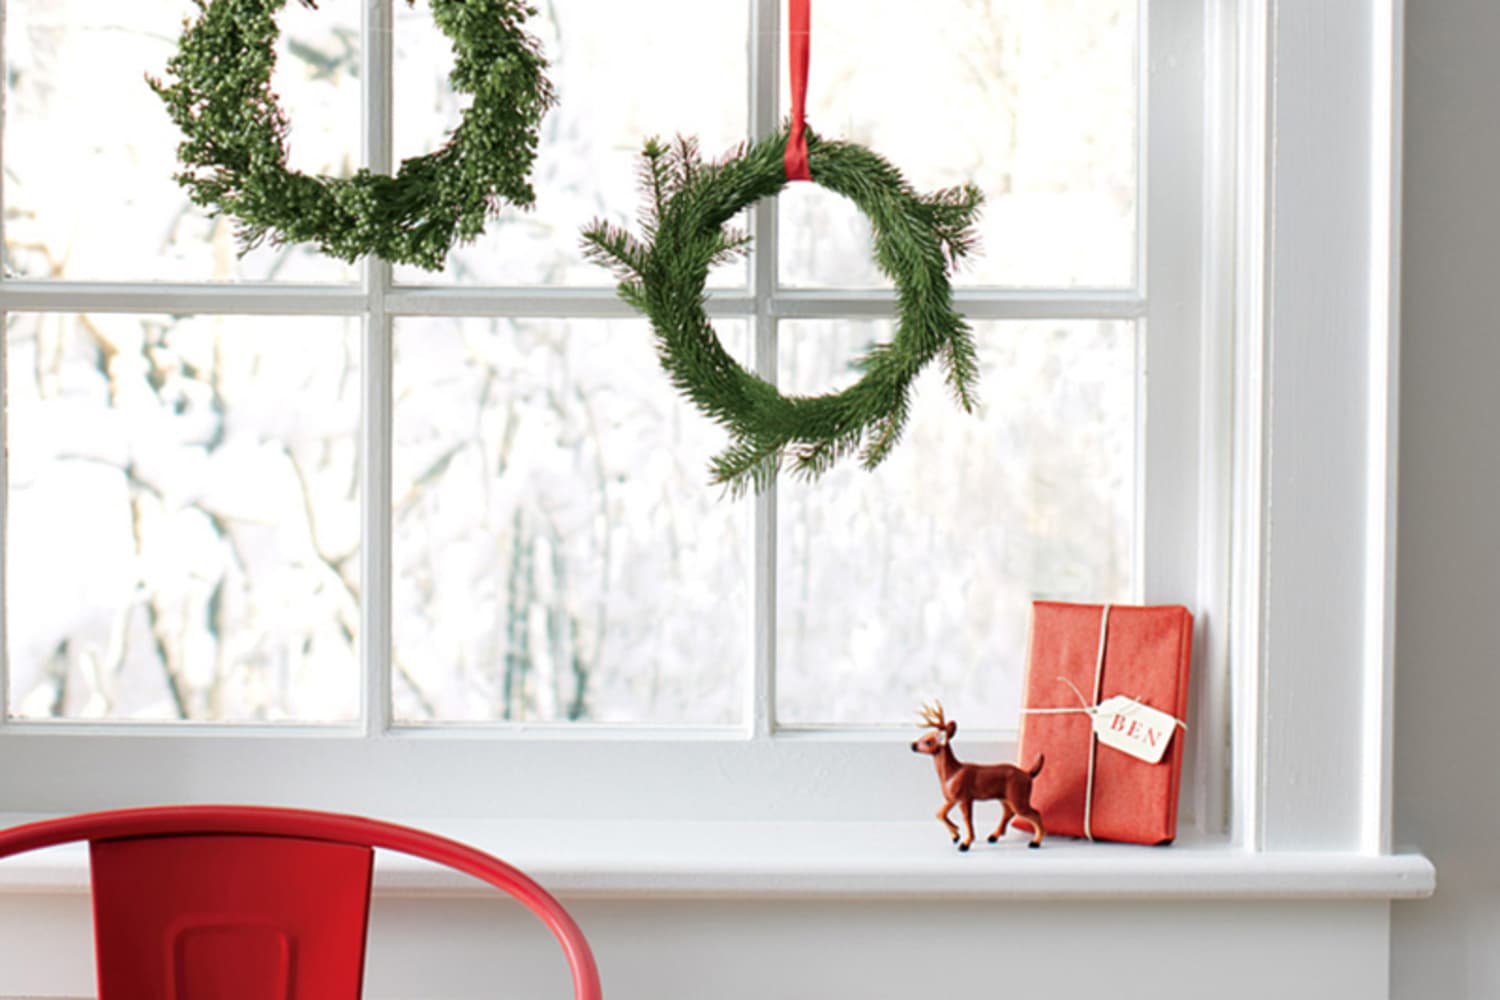 Small on Space, Big On Style: 9 Ideas for Small-Scale Holiday ...